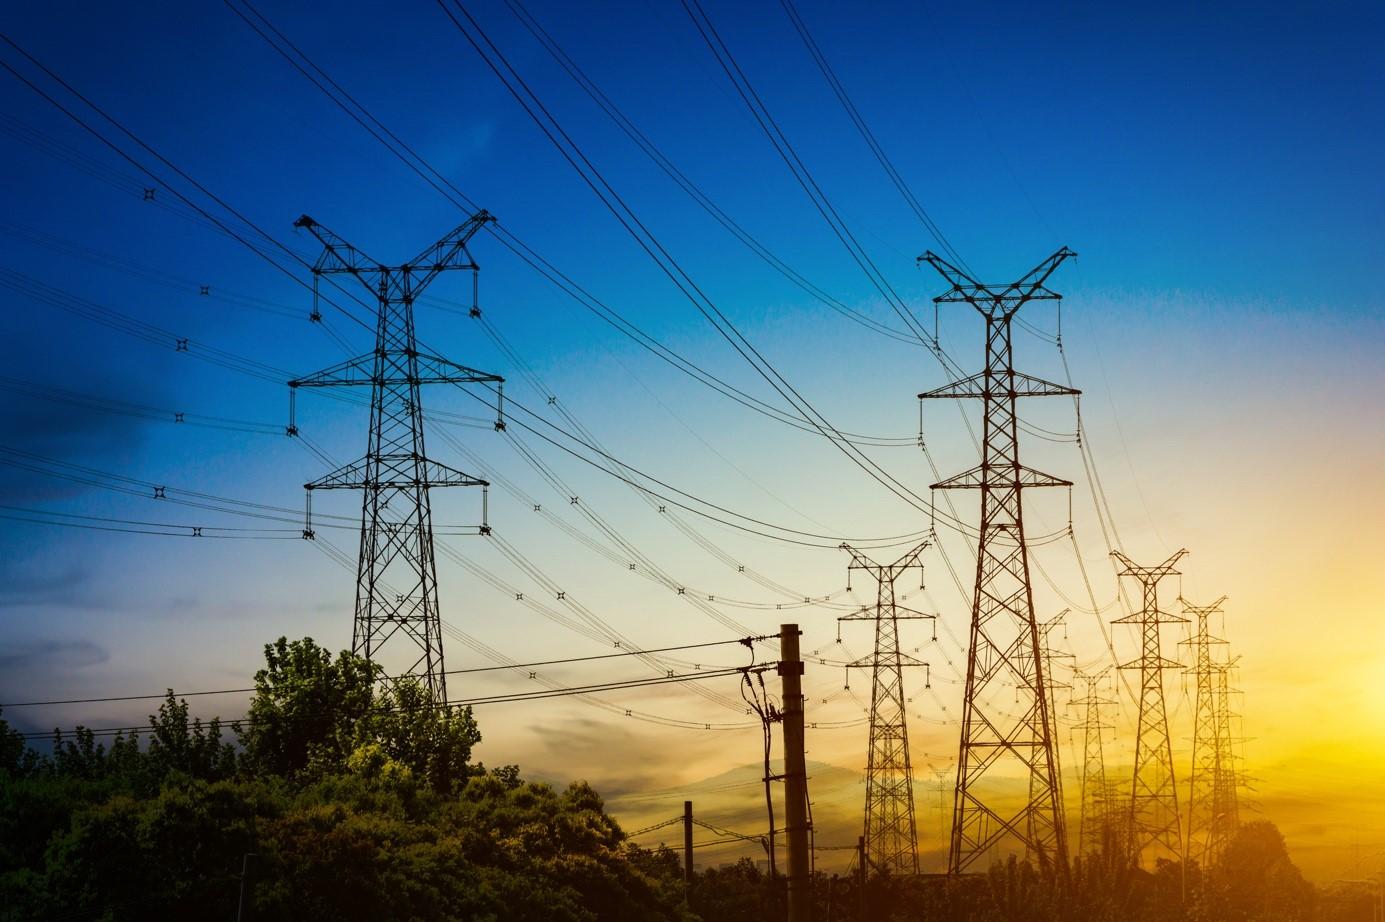 Amendment to the Regulation on Unlicensed Electricity Generation in the Electricity Market.